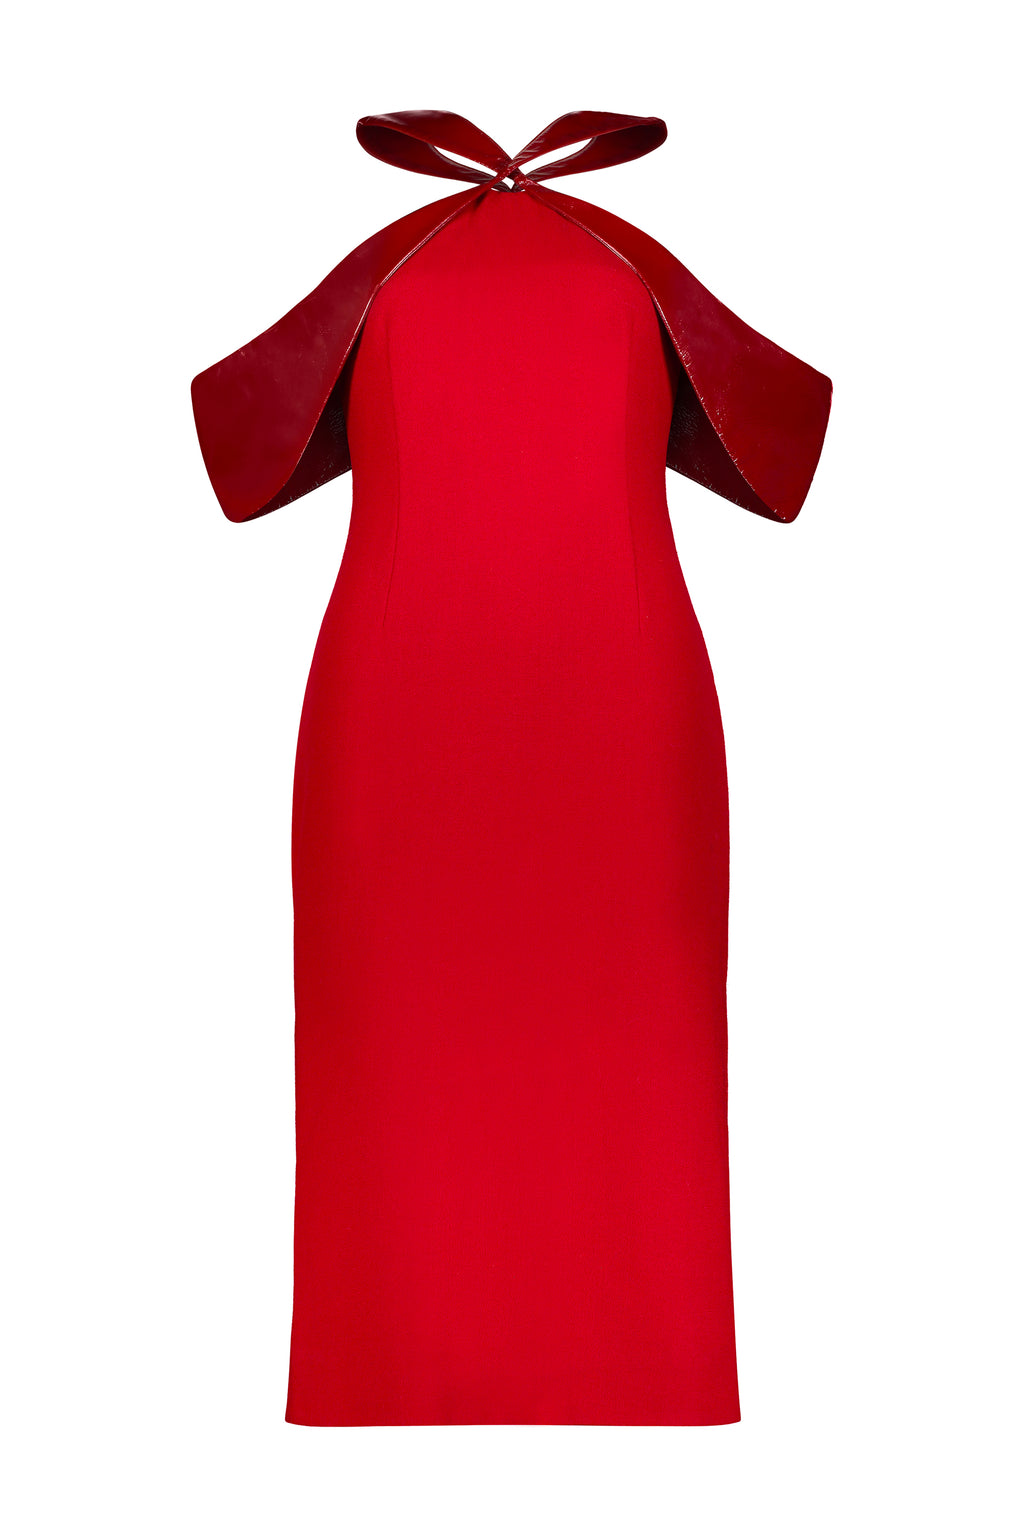 Washington Roberts Kite Dress in Wool Crepe and 100% Calf Patent leather - Alter Neck Sheath Dress